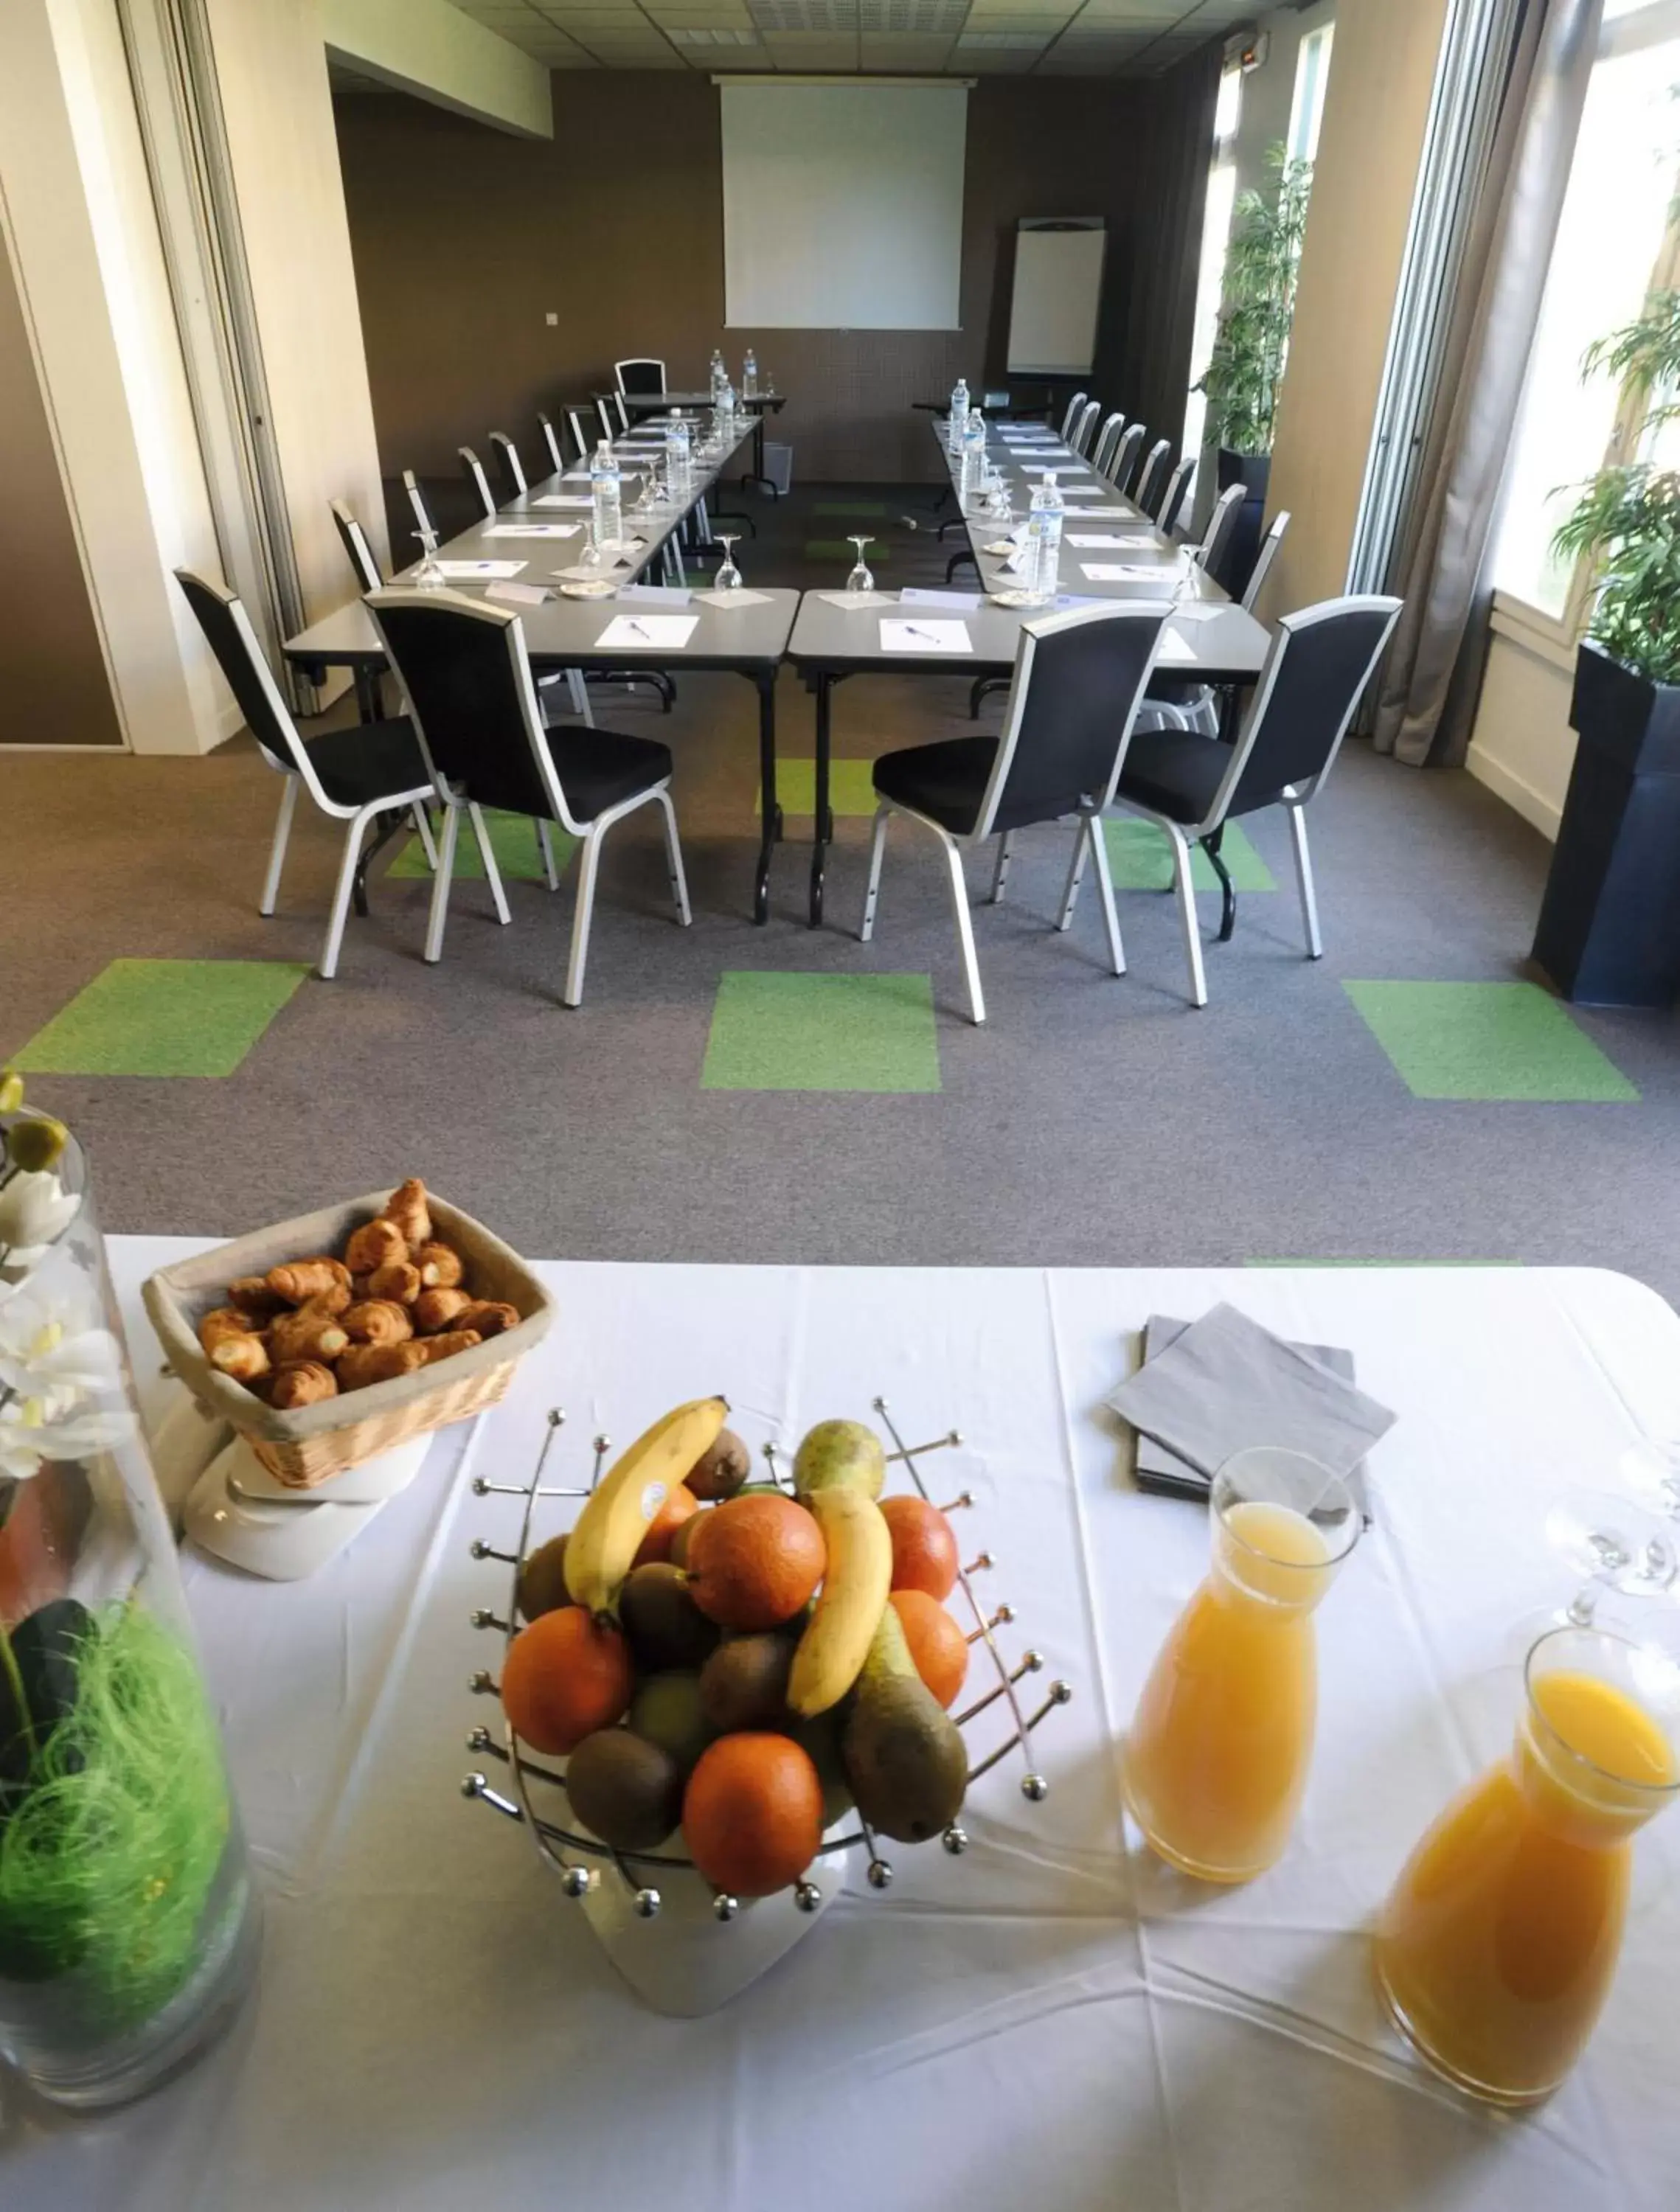 Business facilities in Kyriad Rennes Sud - Chantepie